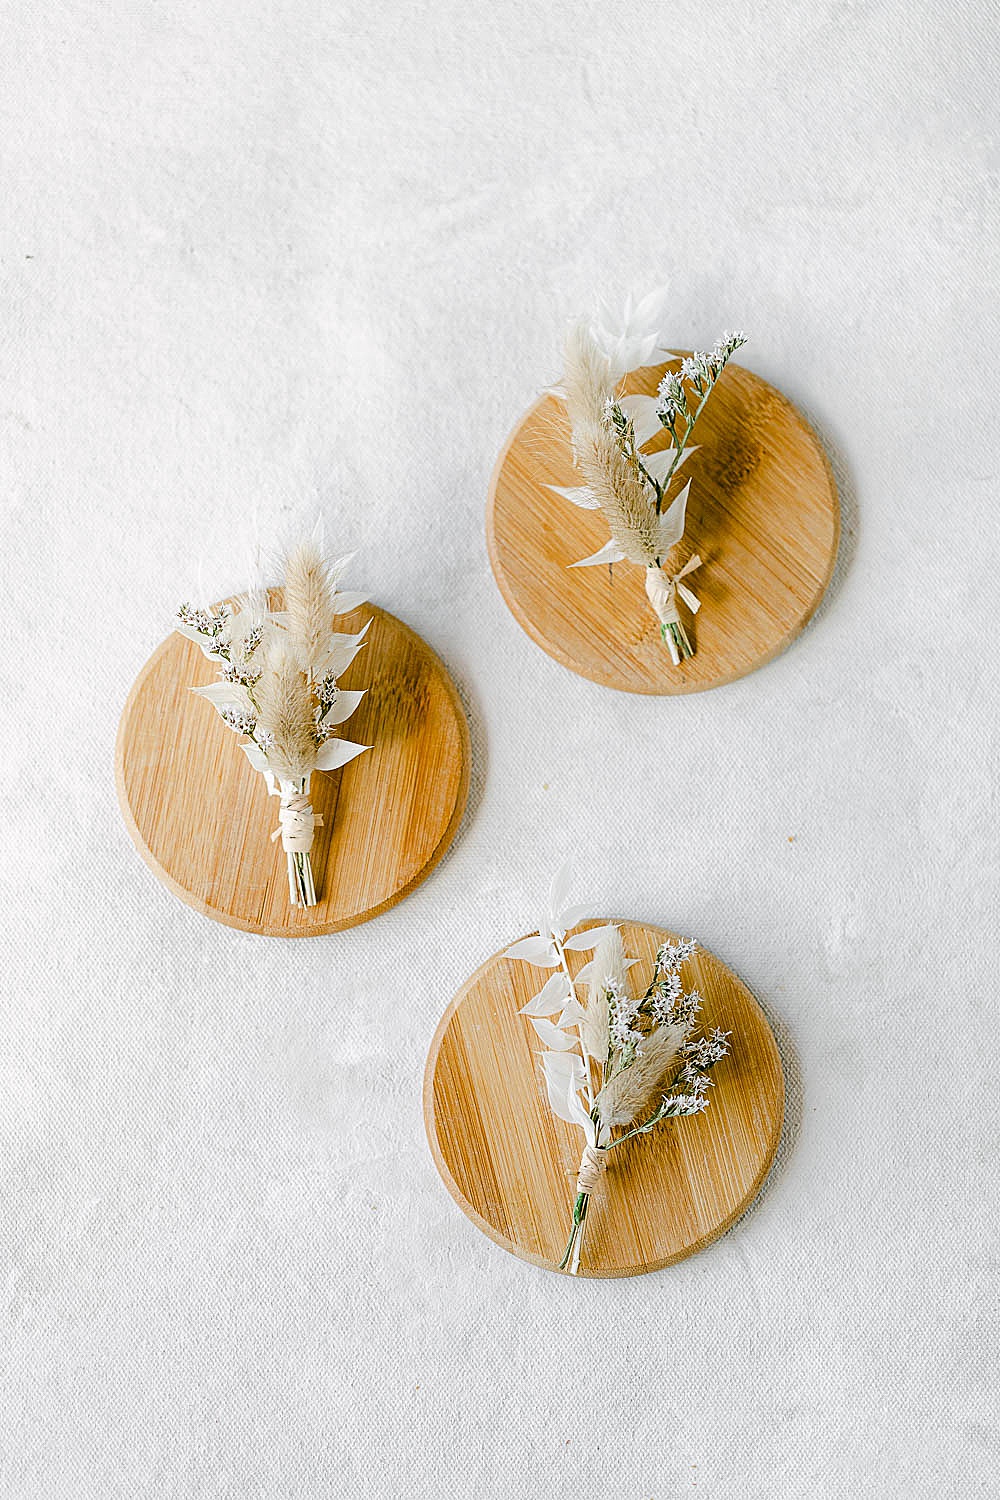 Dried floral boutonnieres